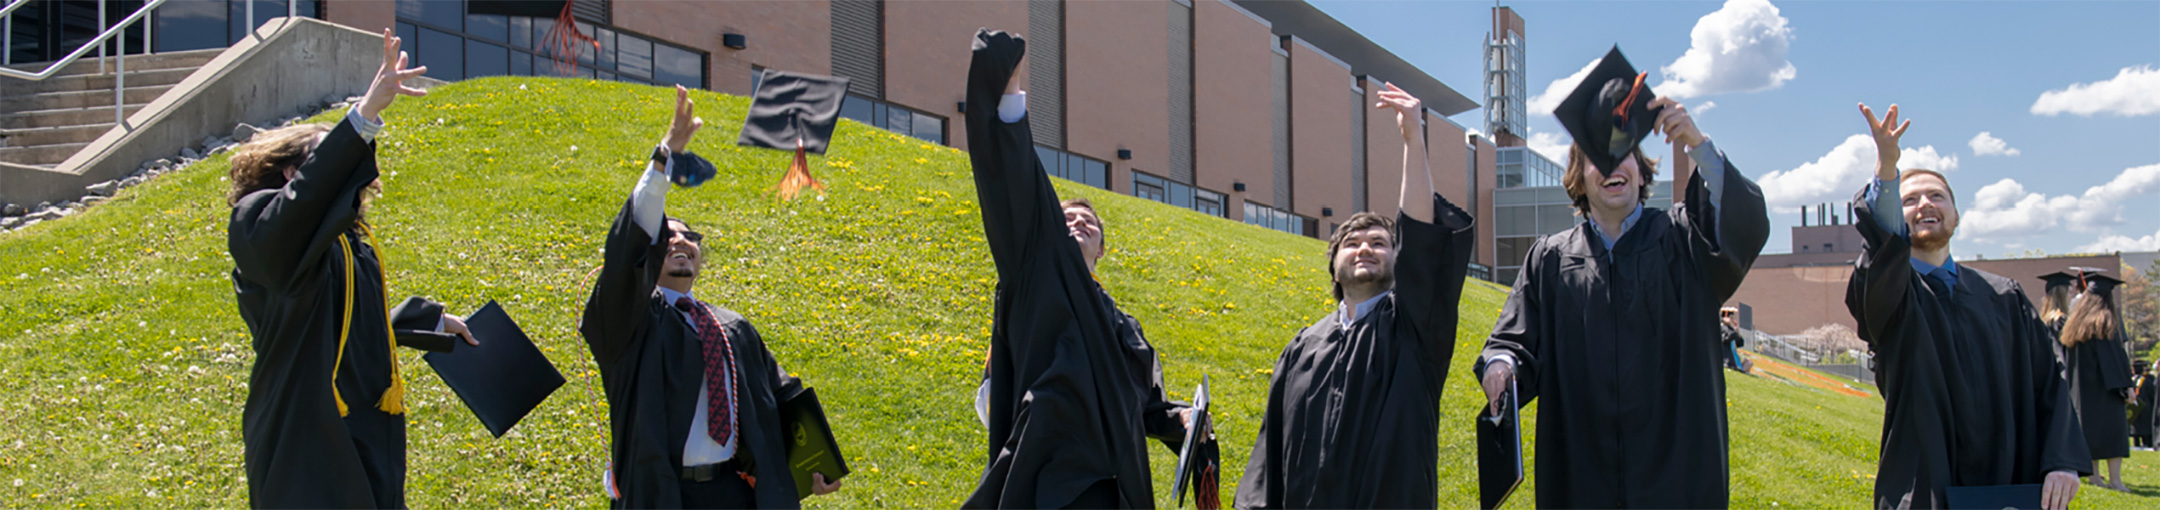 Students tossing their caps into the air.